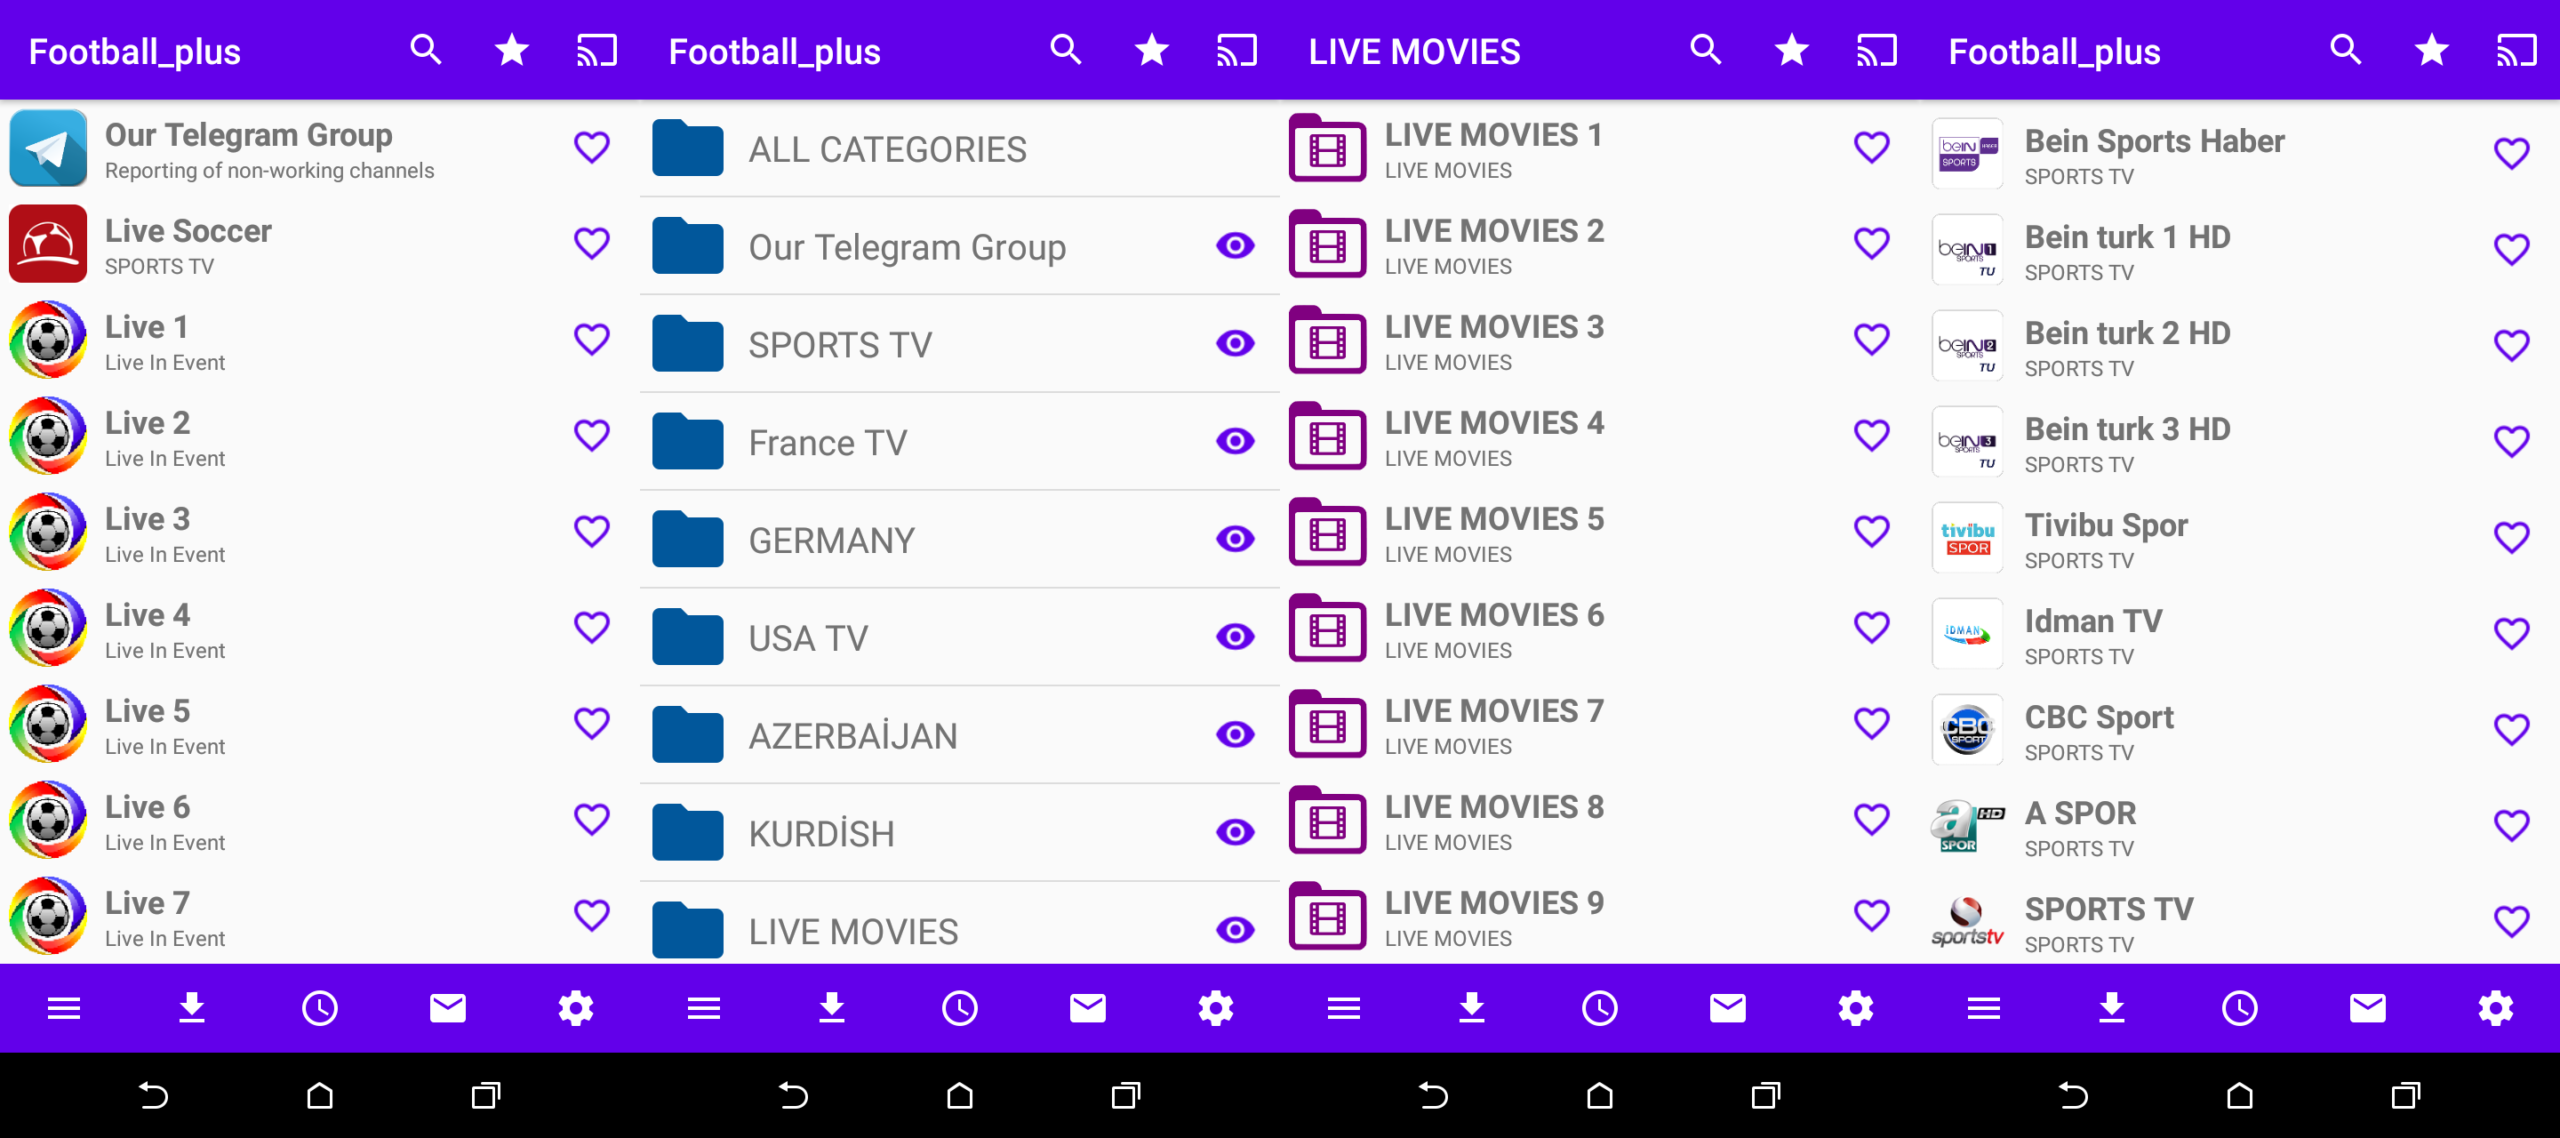 FOOTBALL PLUS for Android - APK [Latest]